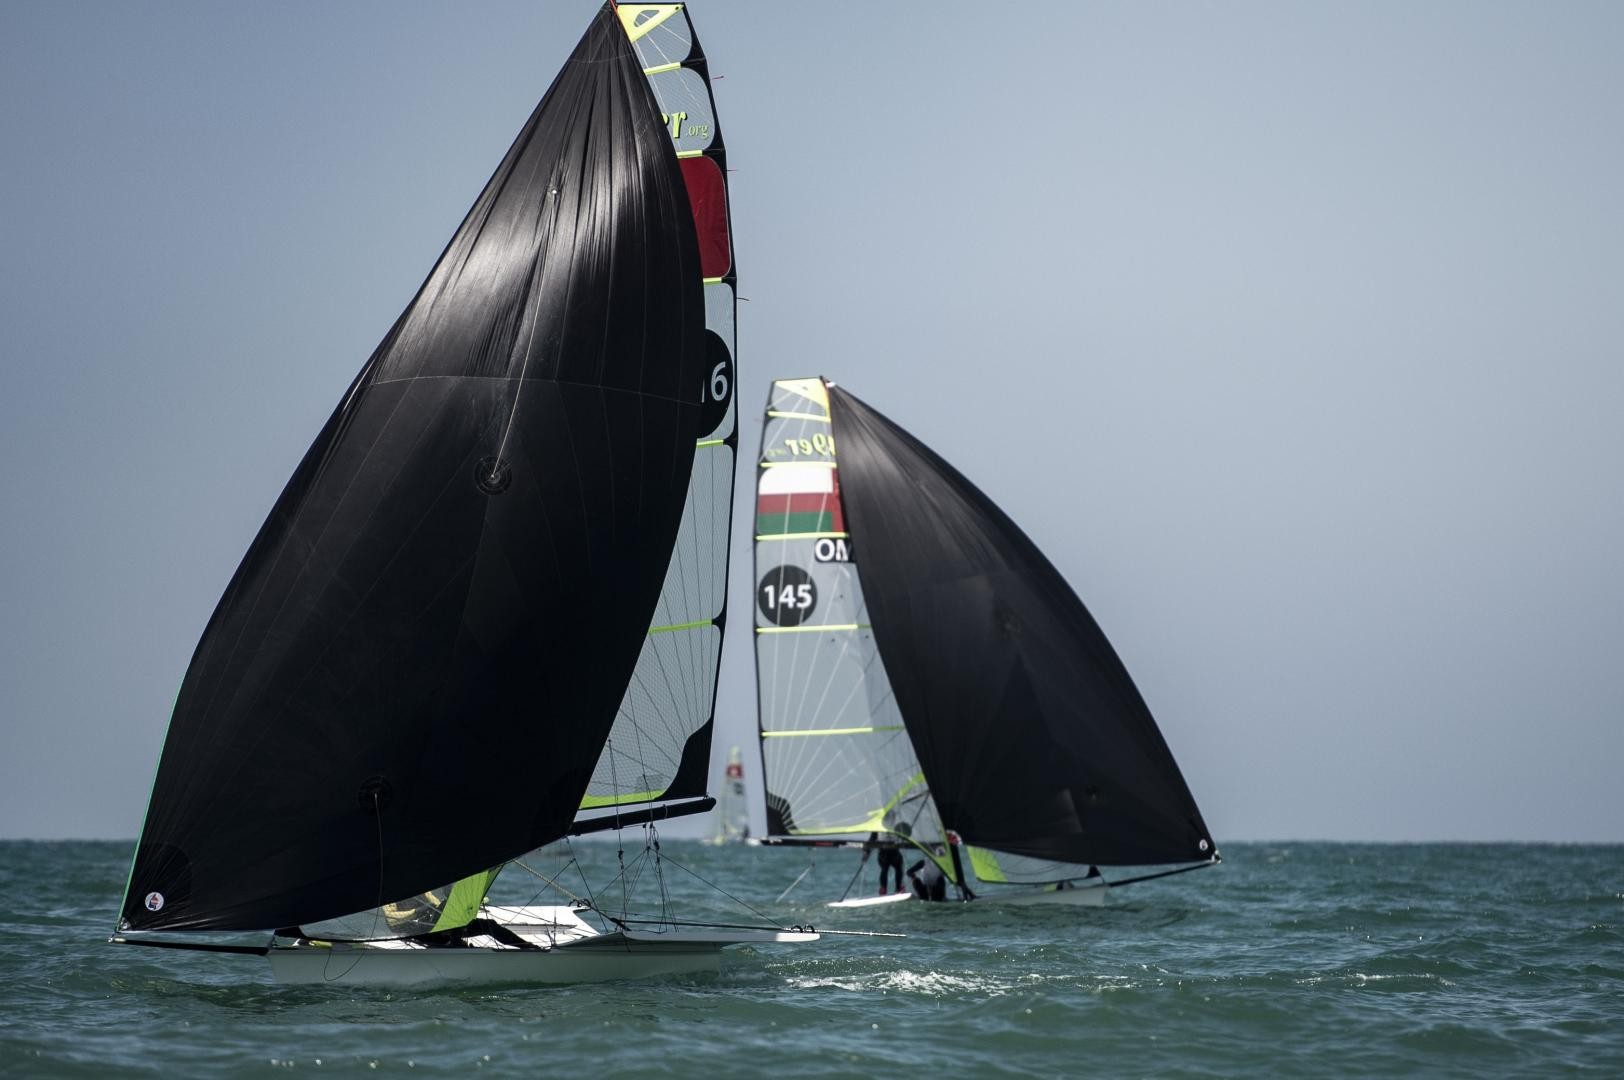 Sailors battle the elements on day 4 of Mussanah Open Championship